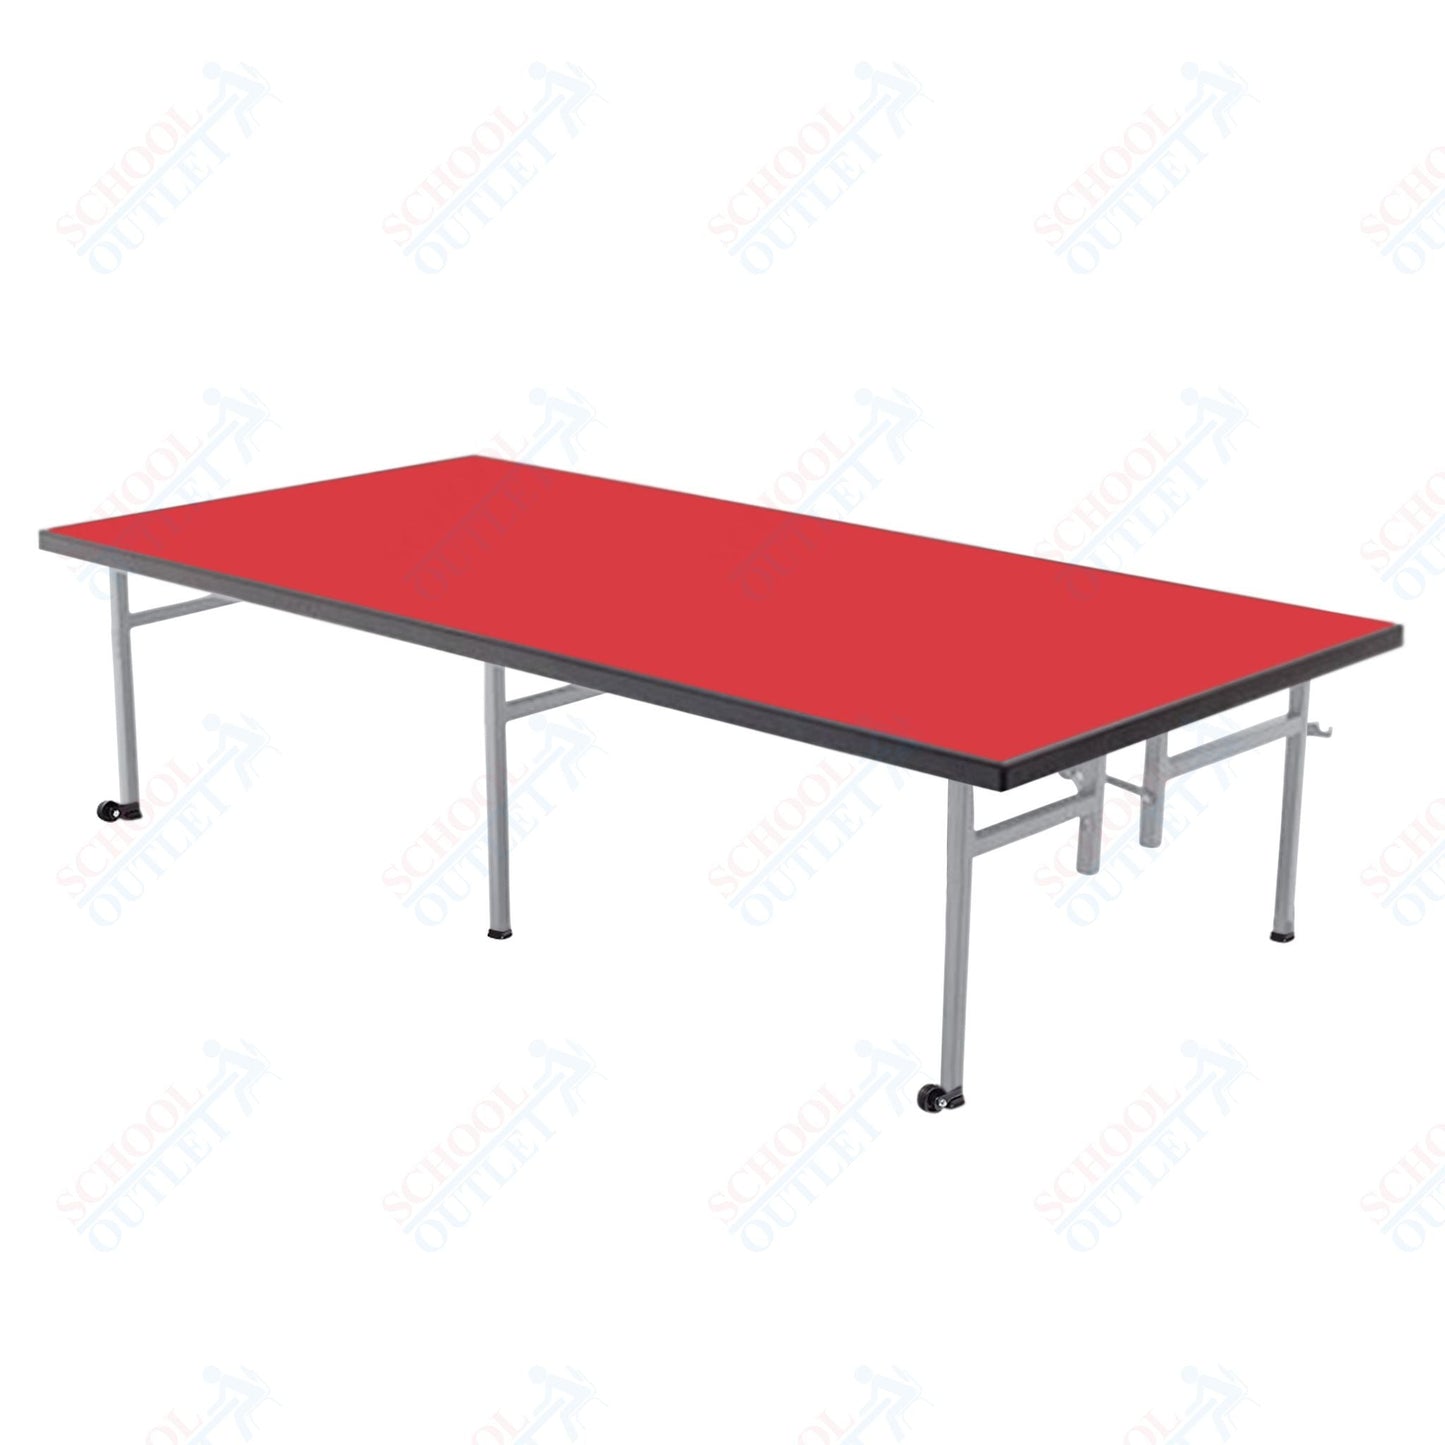 AmTab Fixed Height Stage - Carpet Top - 36"W x 96"L x 8"H (AmTab AMT - ST3808C) - SchoolOutlet